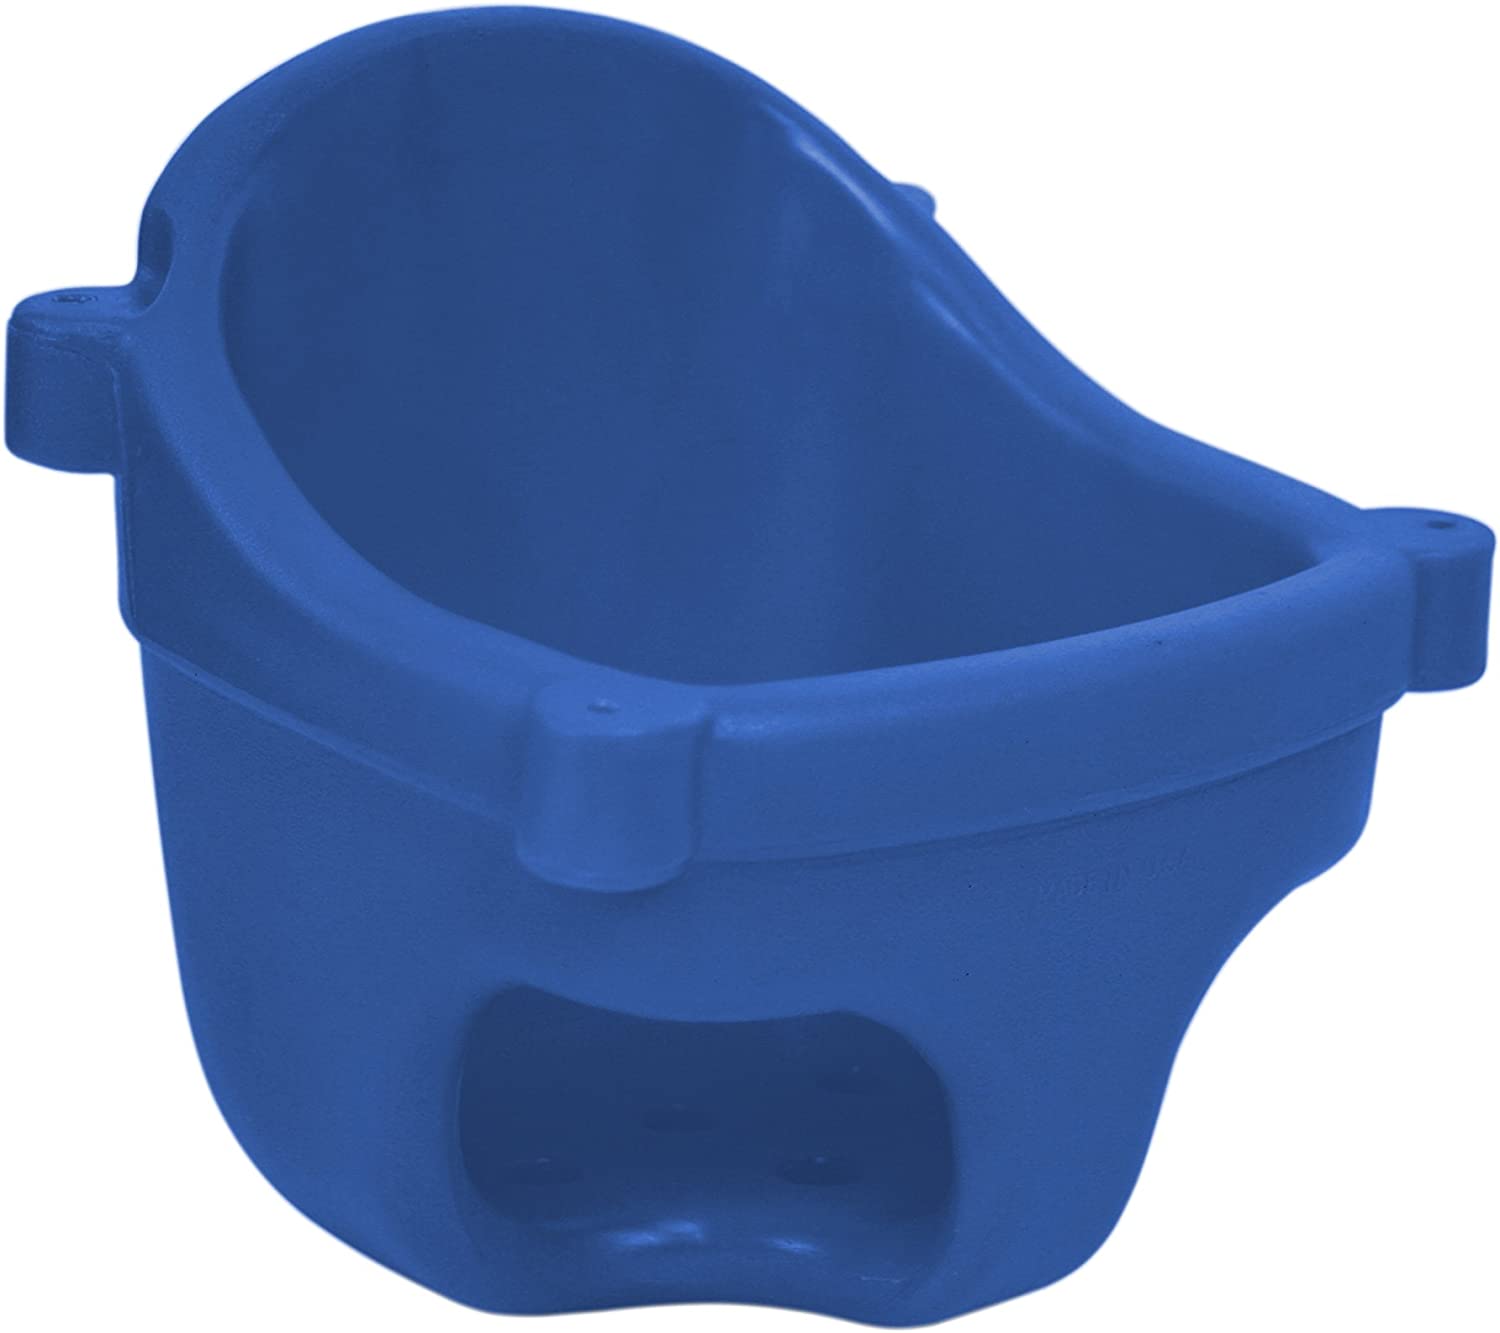 American Swing Blue Toddler Full Bucket Roto-molded Commerical or Residential